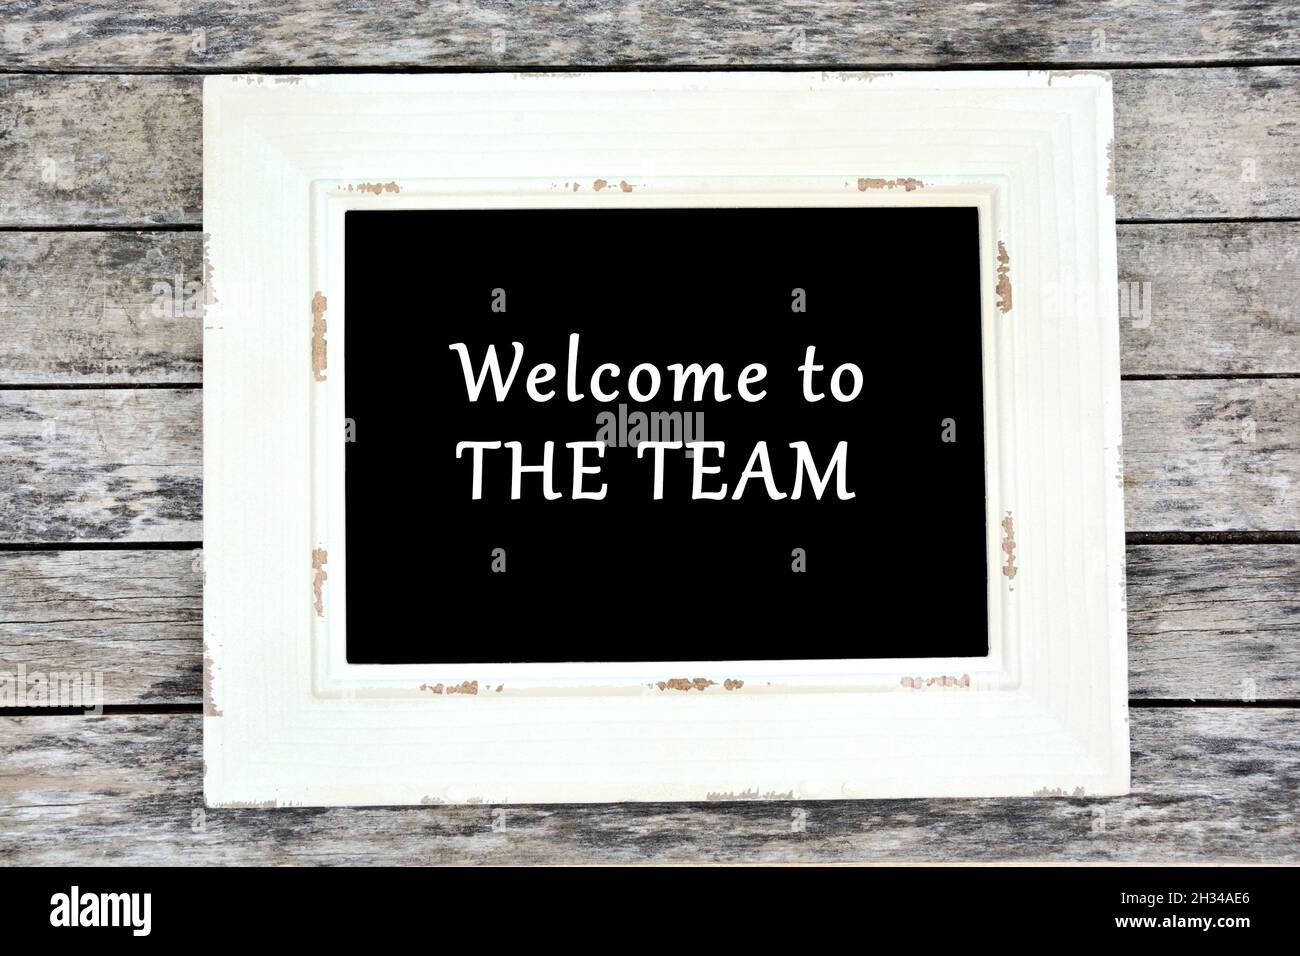 Welcome to the team text on blackboard. Top view Stock Photo